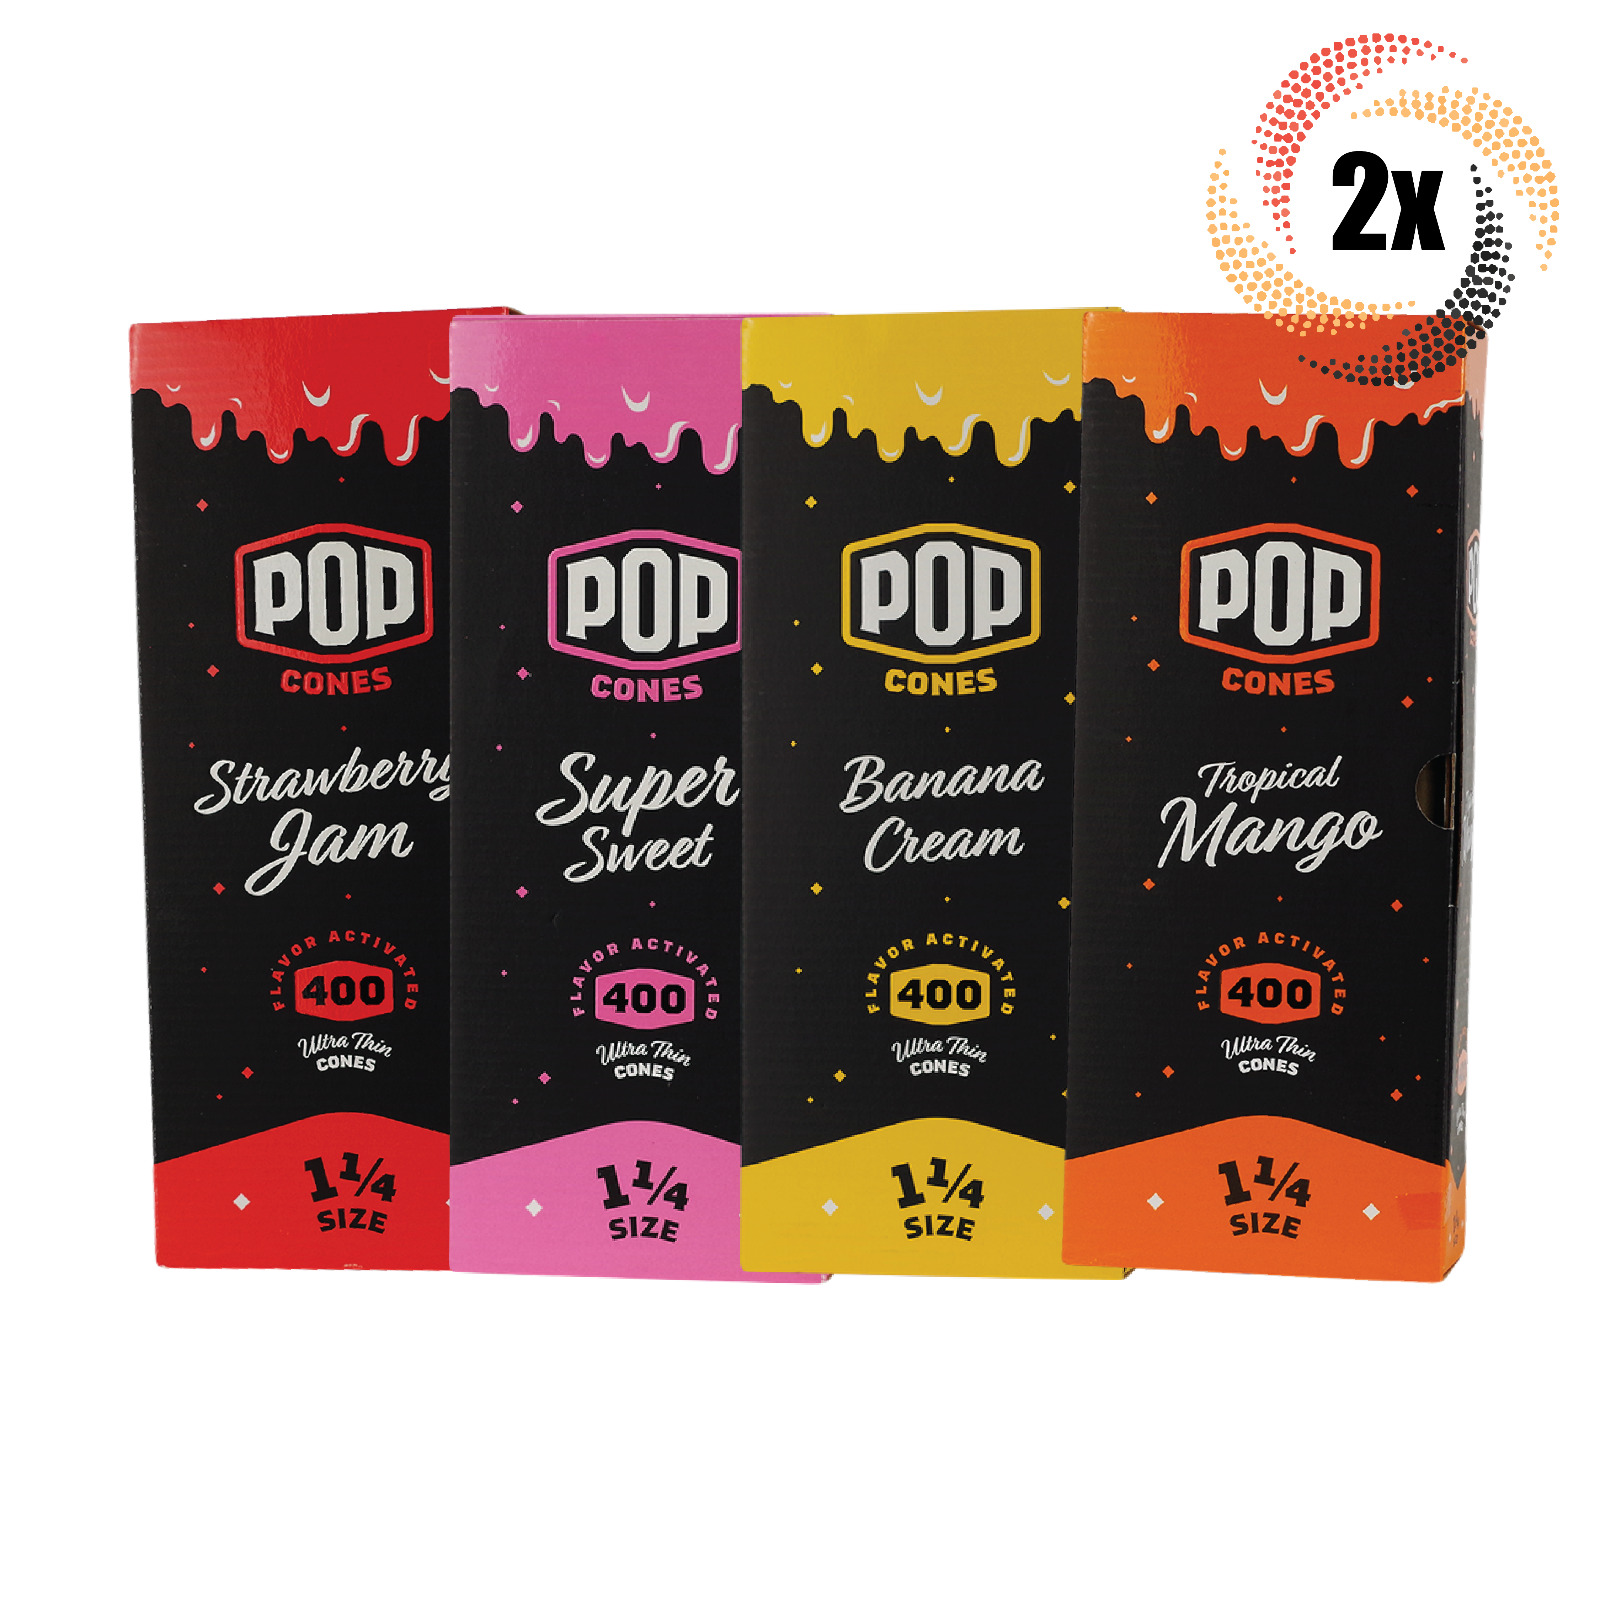 2x Boxes Pop Variety Cones | 400 Cones Each | 1 1/4 | Mix & Match Flavors